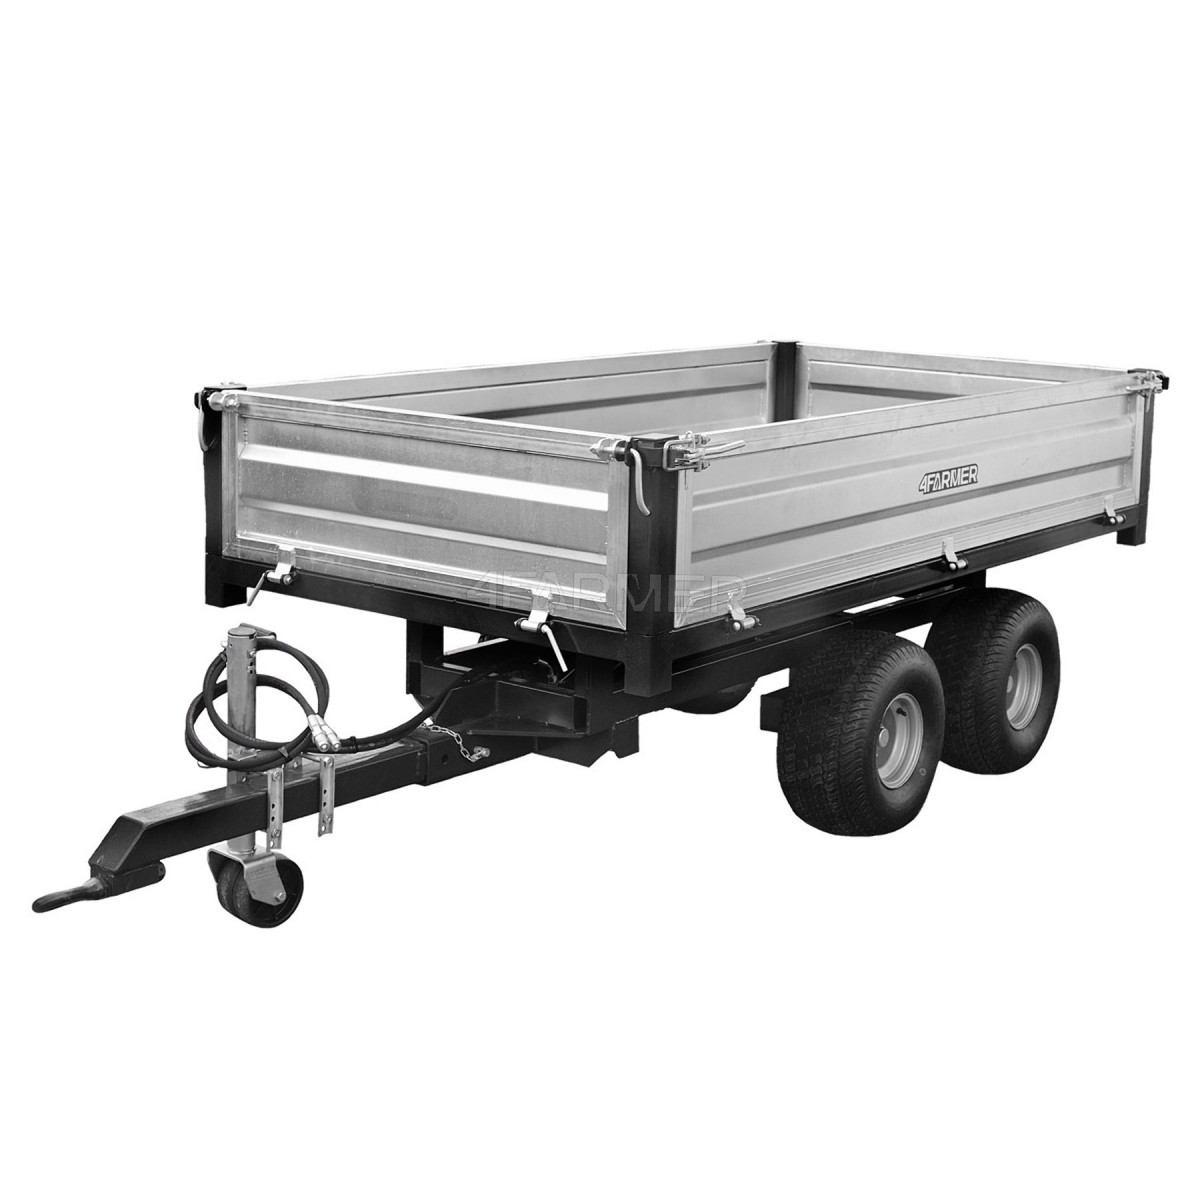 Two-axle agricultural trailer 2.5T with a 4FARMER tipper